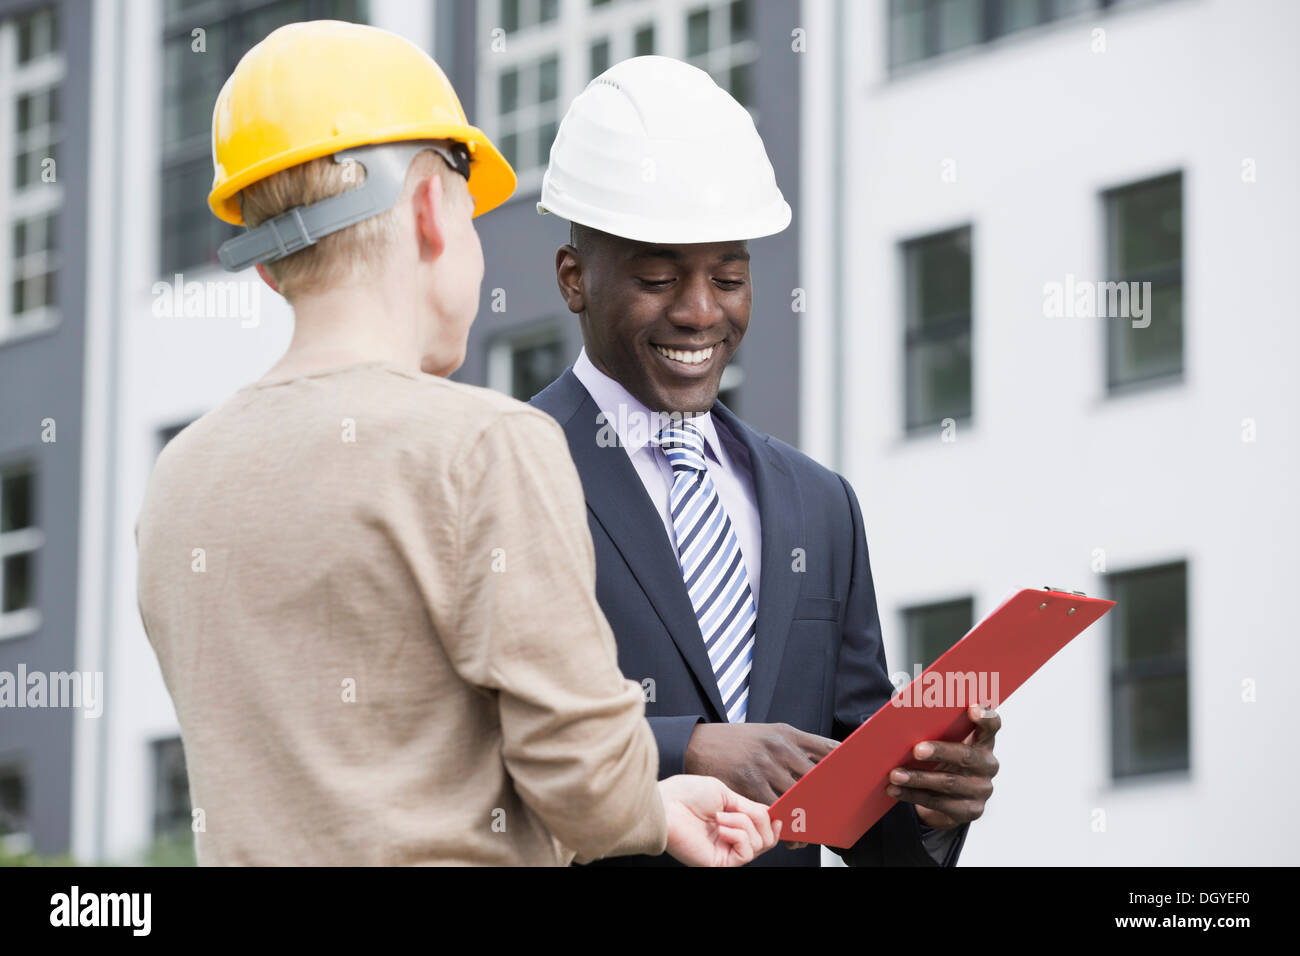 Businessman happily giving directions to manual worker Stock Photo